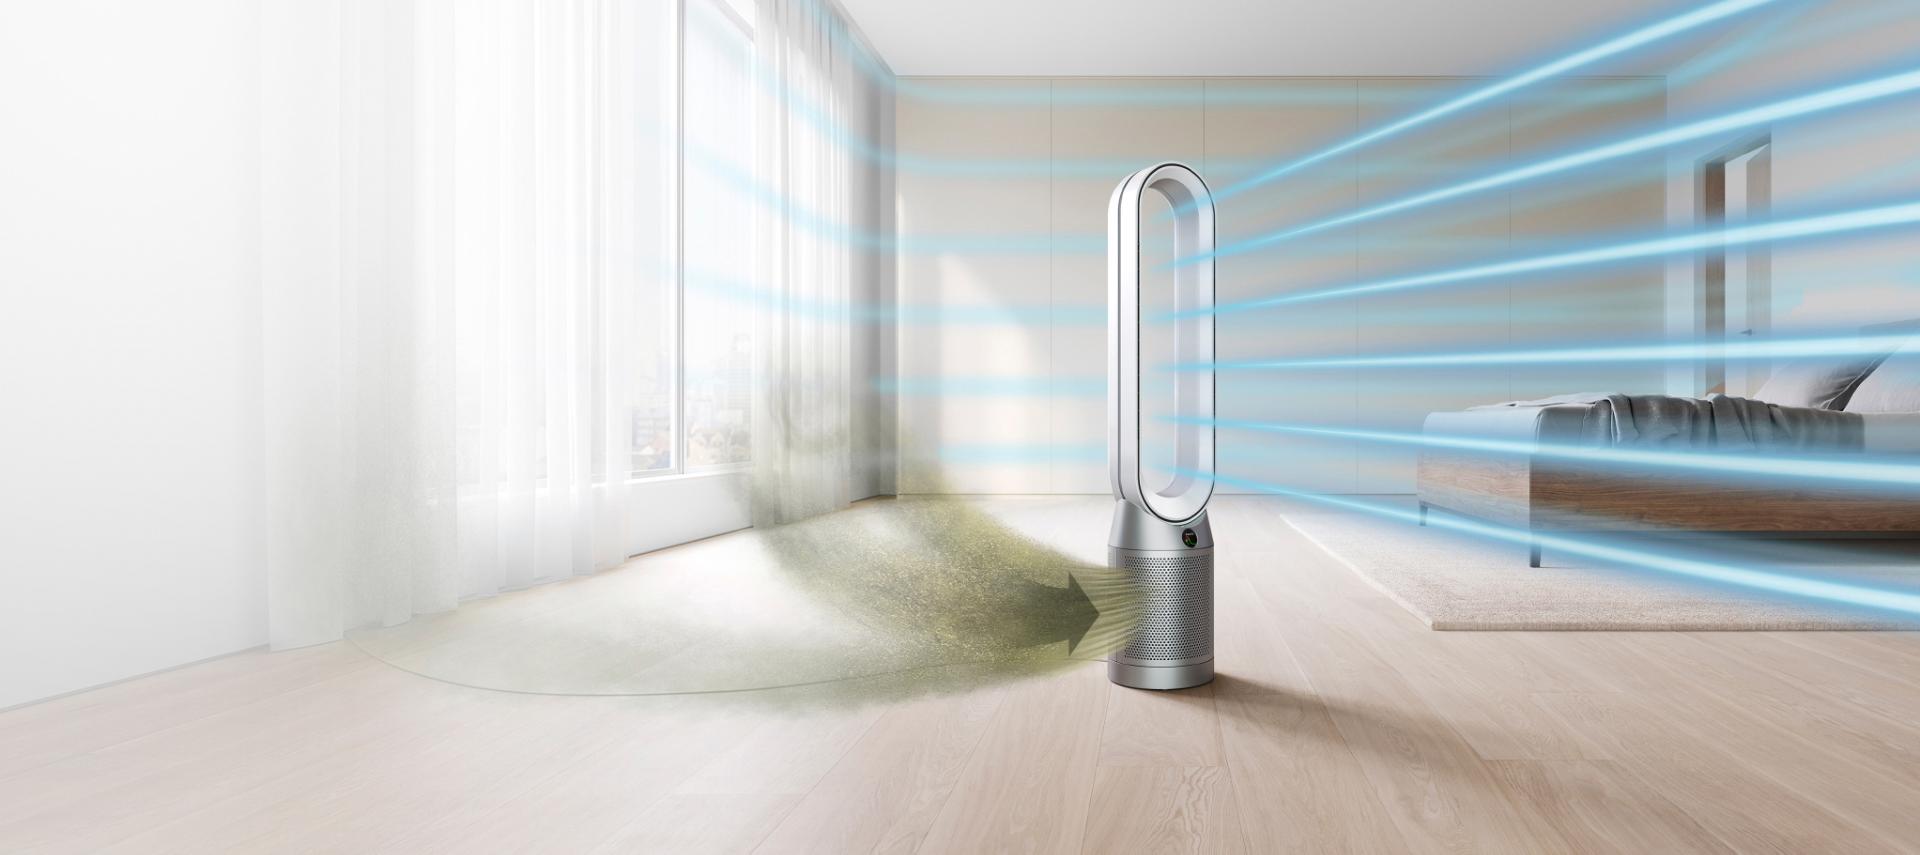 Dyson Purifier projecting purified air around a hotel room